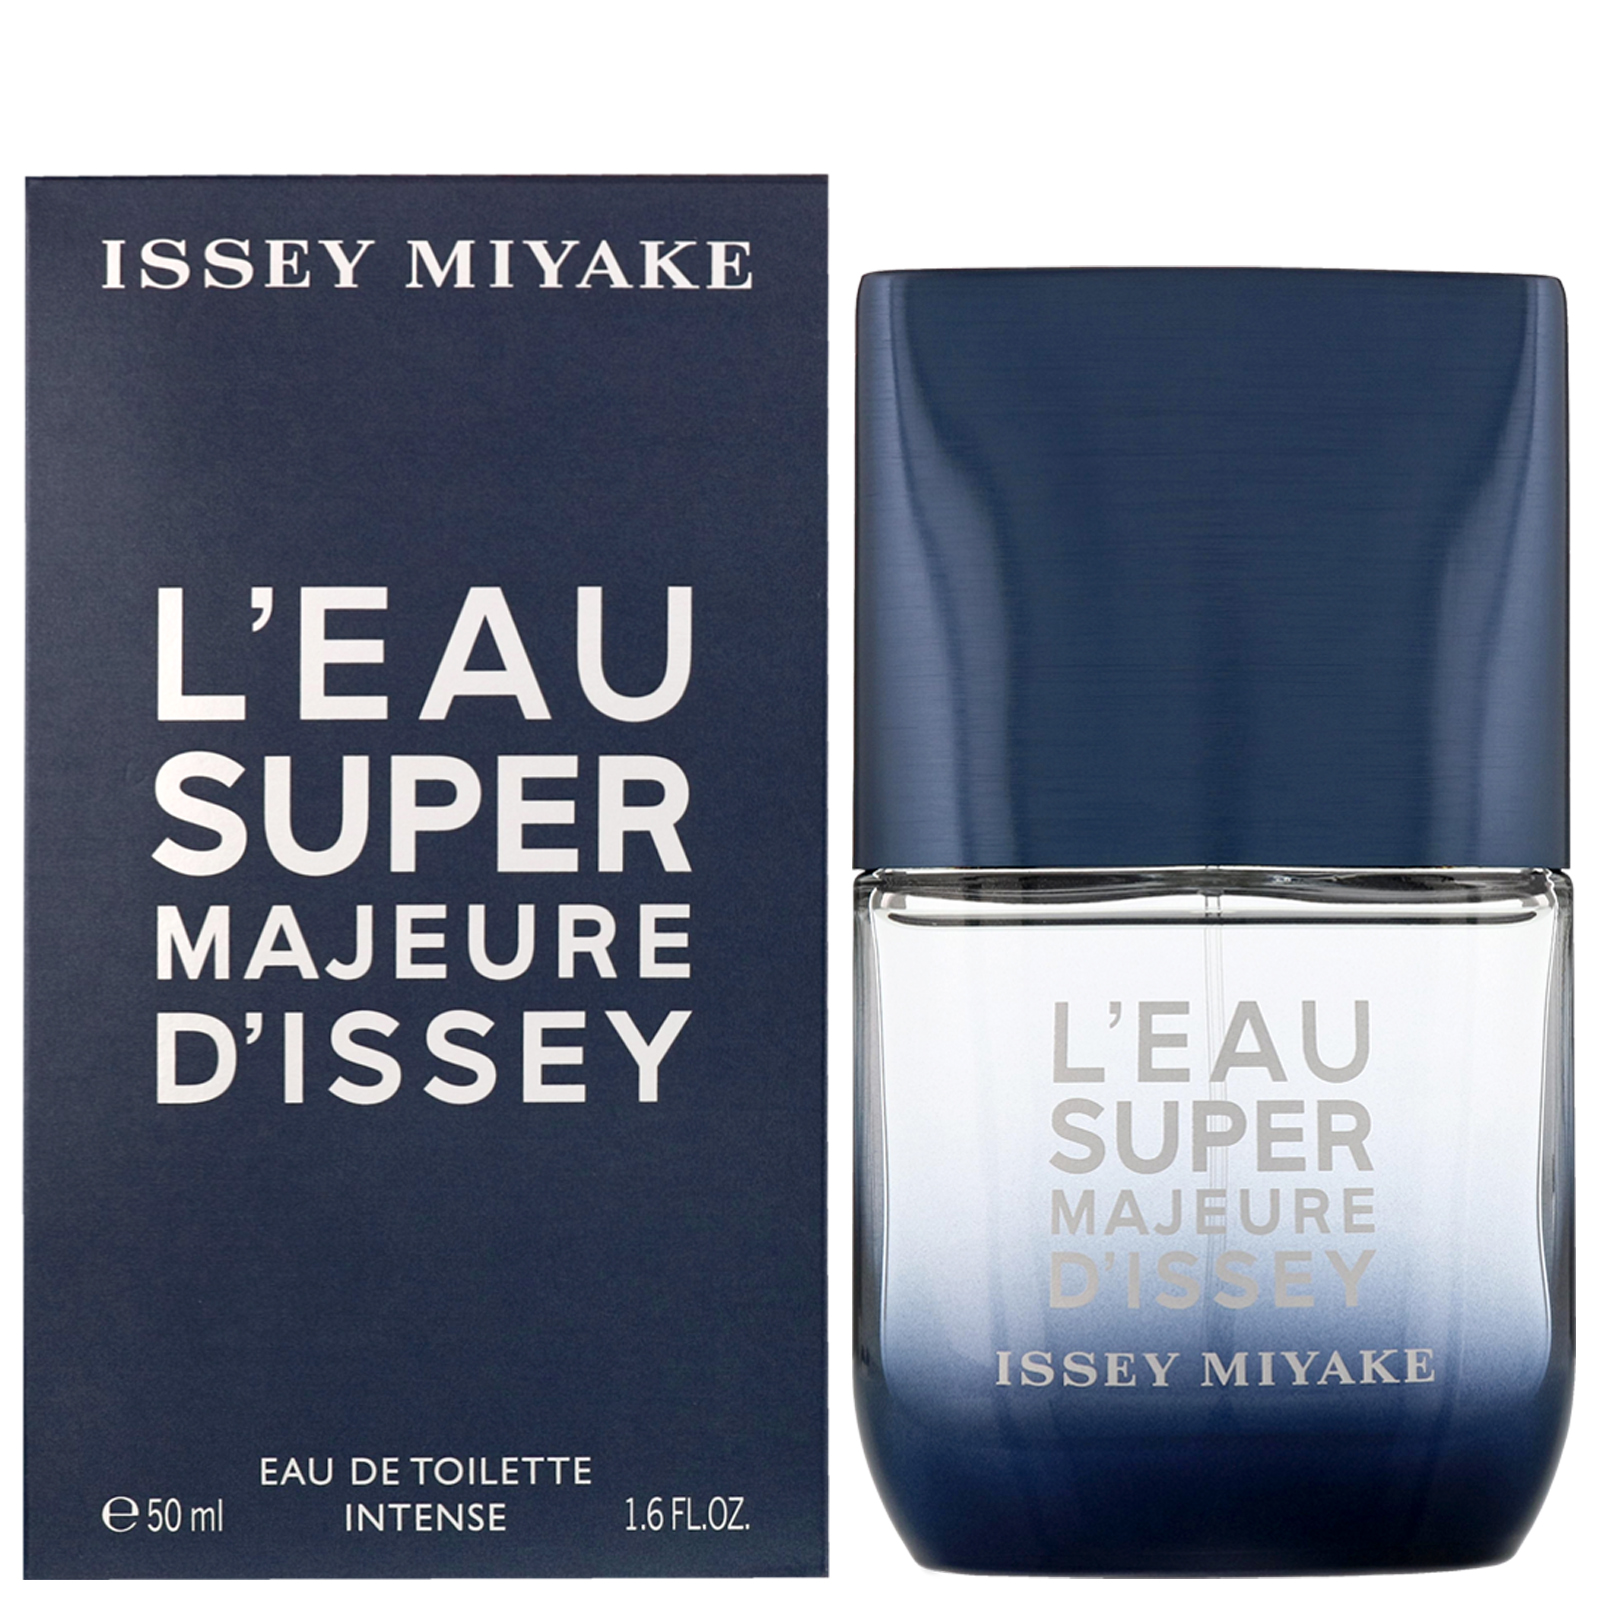 ISSY MIYAKE – L’EAU SUPER MAJEURE D’ISSY EDT	 50mL